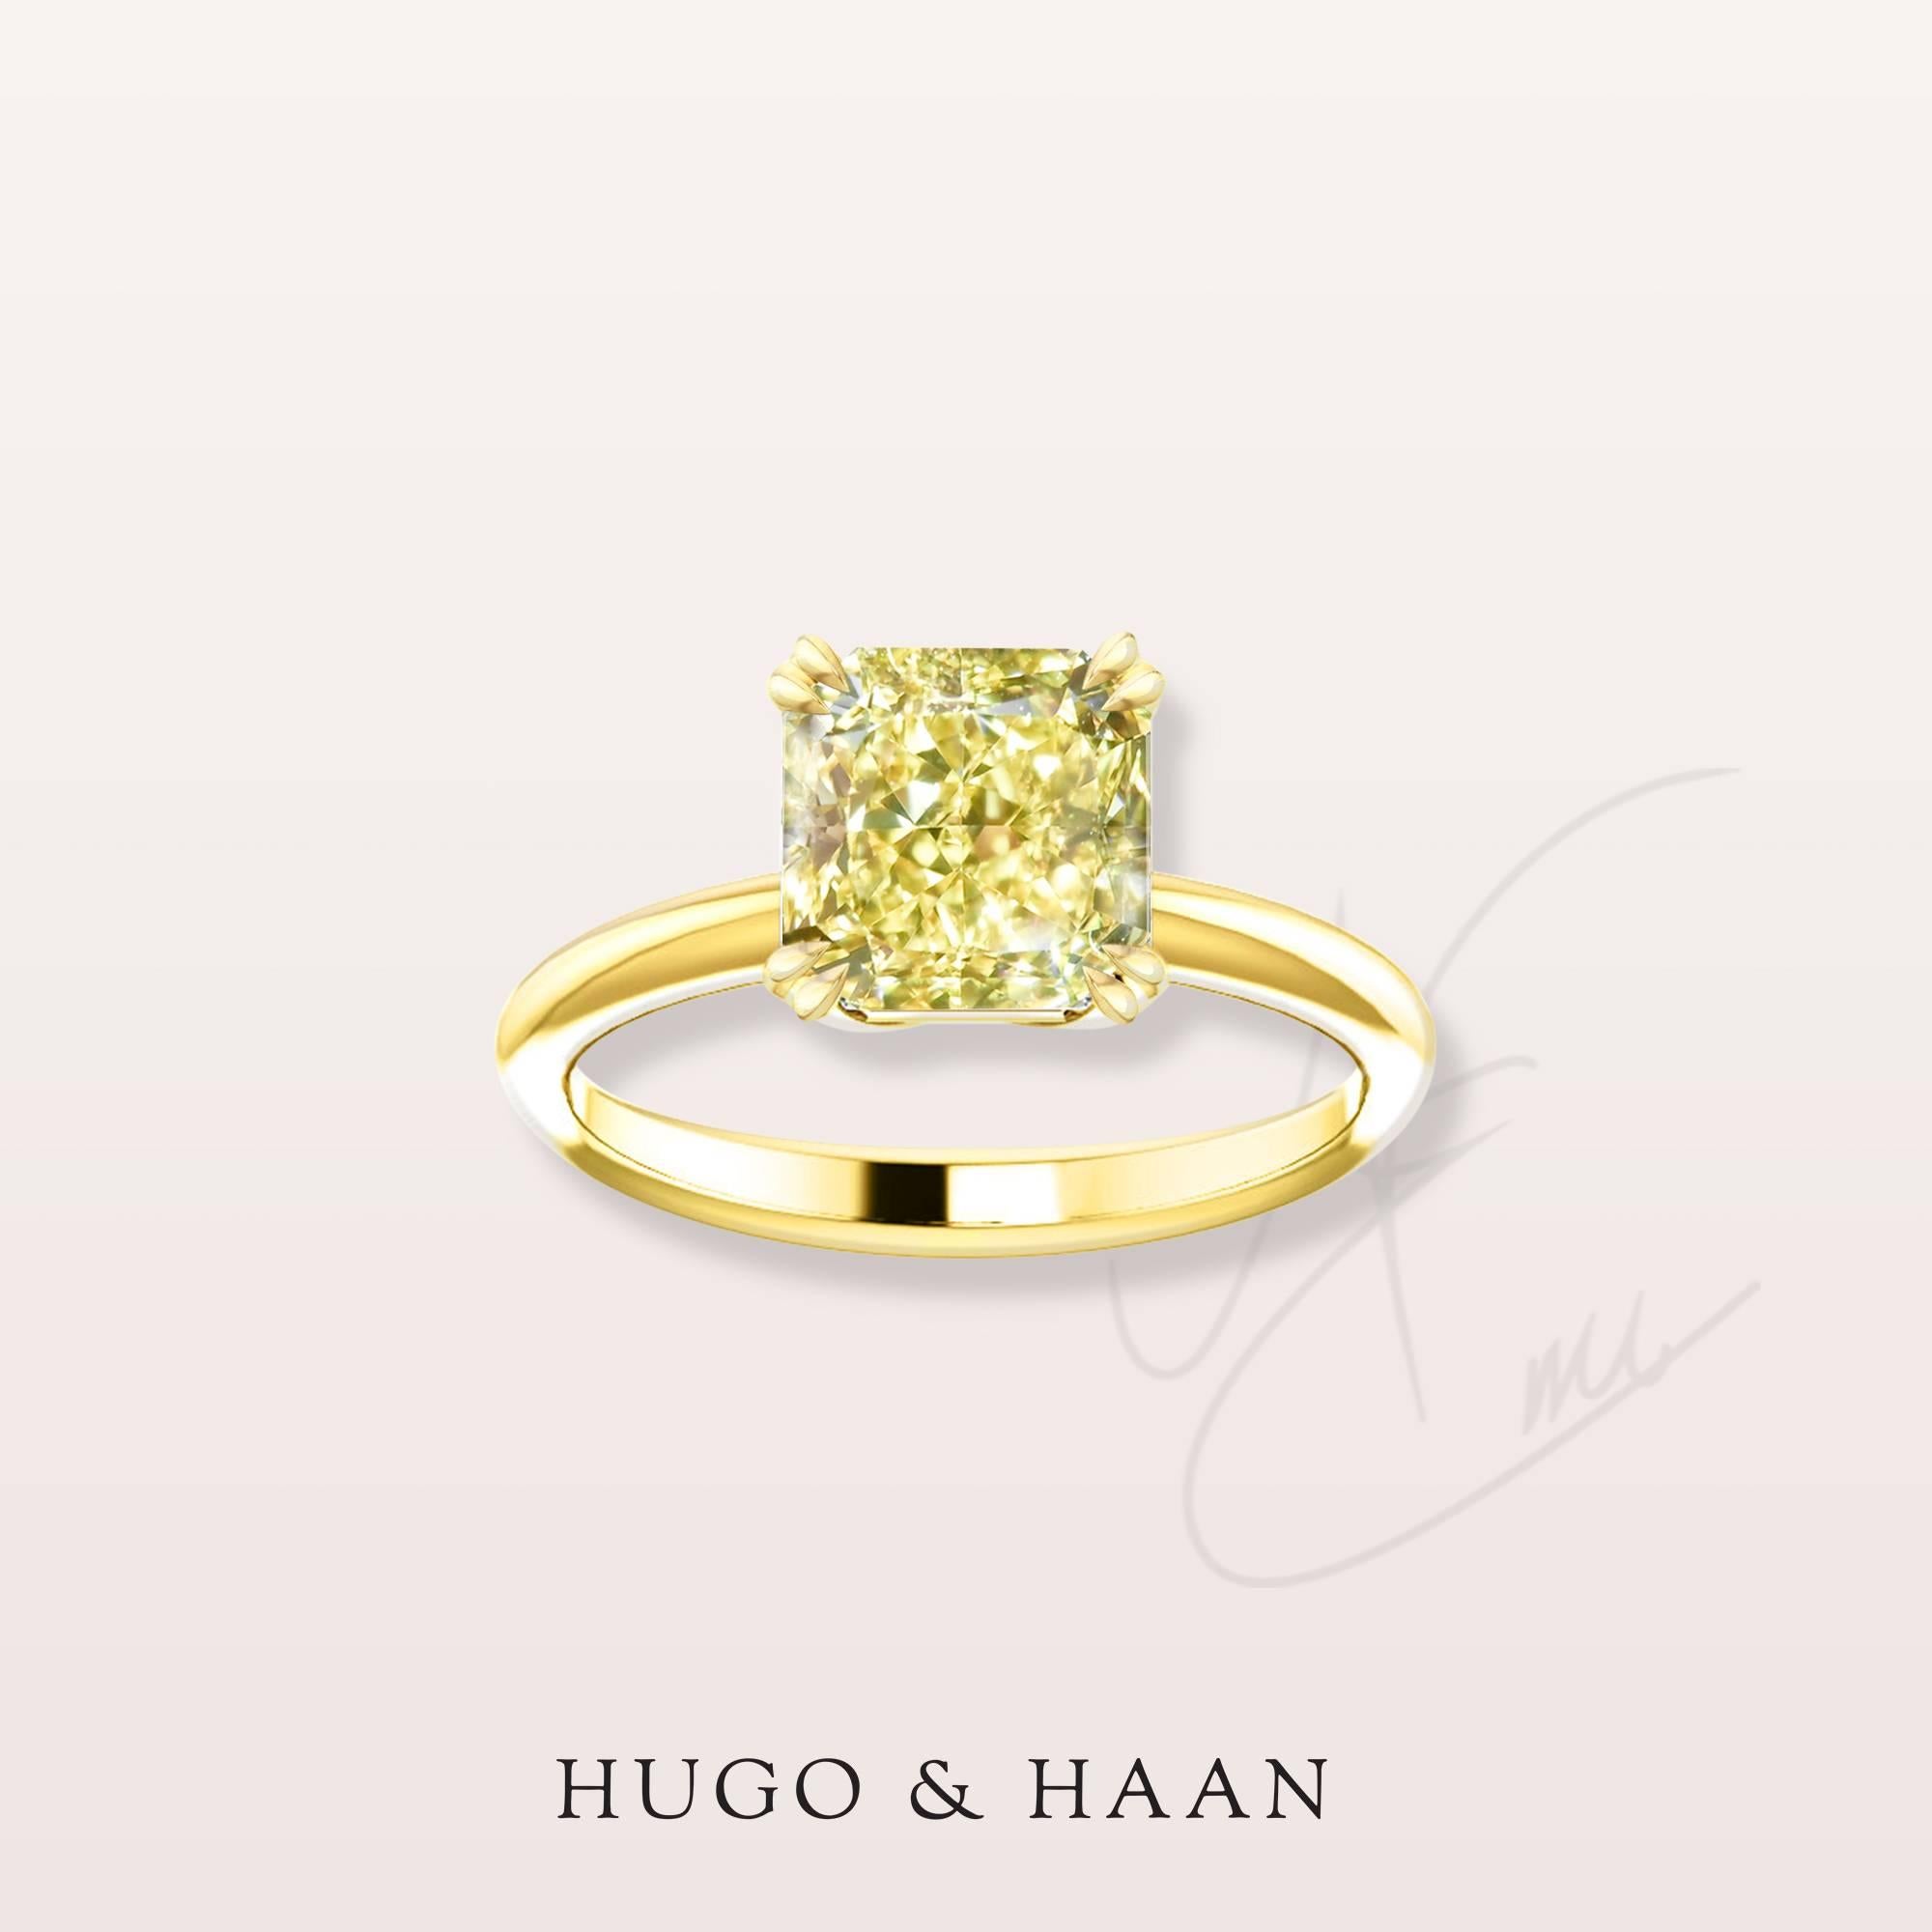 Details:

Material : 18k Yellow Gold
Principle Gemstone : Radiant Cut Yellow Diamond
Other Gemstone : -
Total Diamond Carat Weight : over 1 tcw 
Diamonds Certified: Yes - GIA certified
Customizable: Yes

Options to customize: 

Metals available :